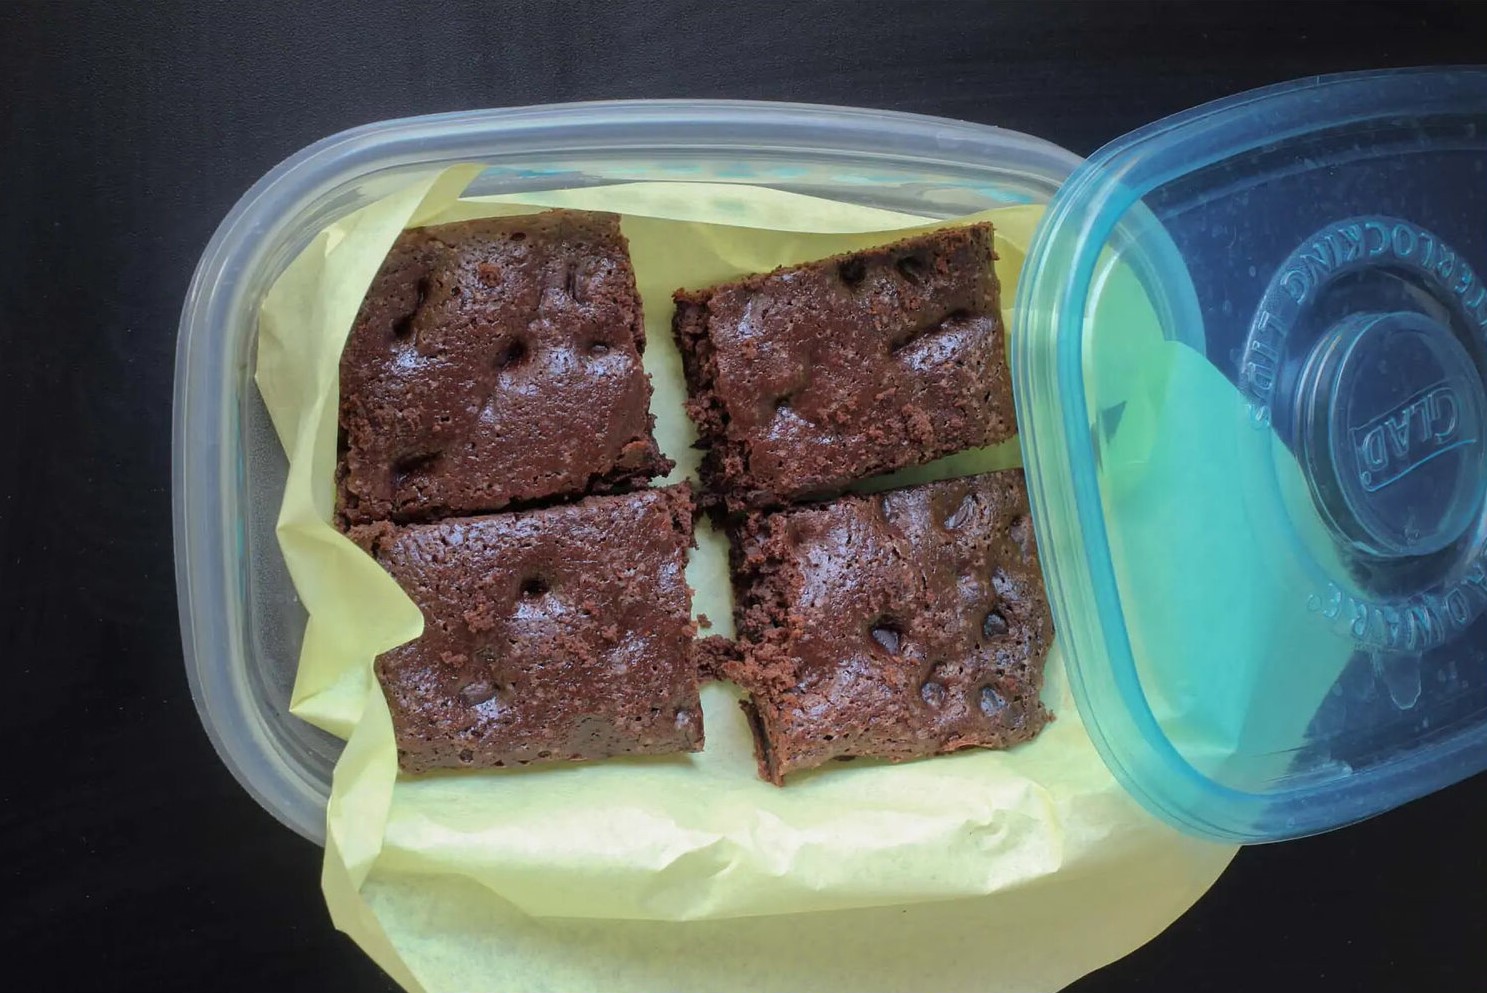 How To Store Brownies